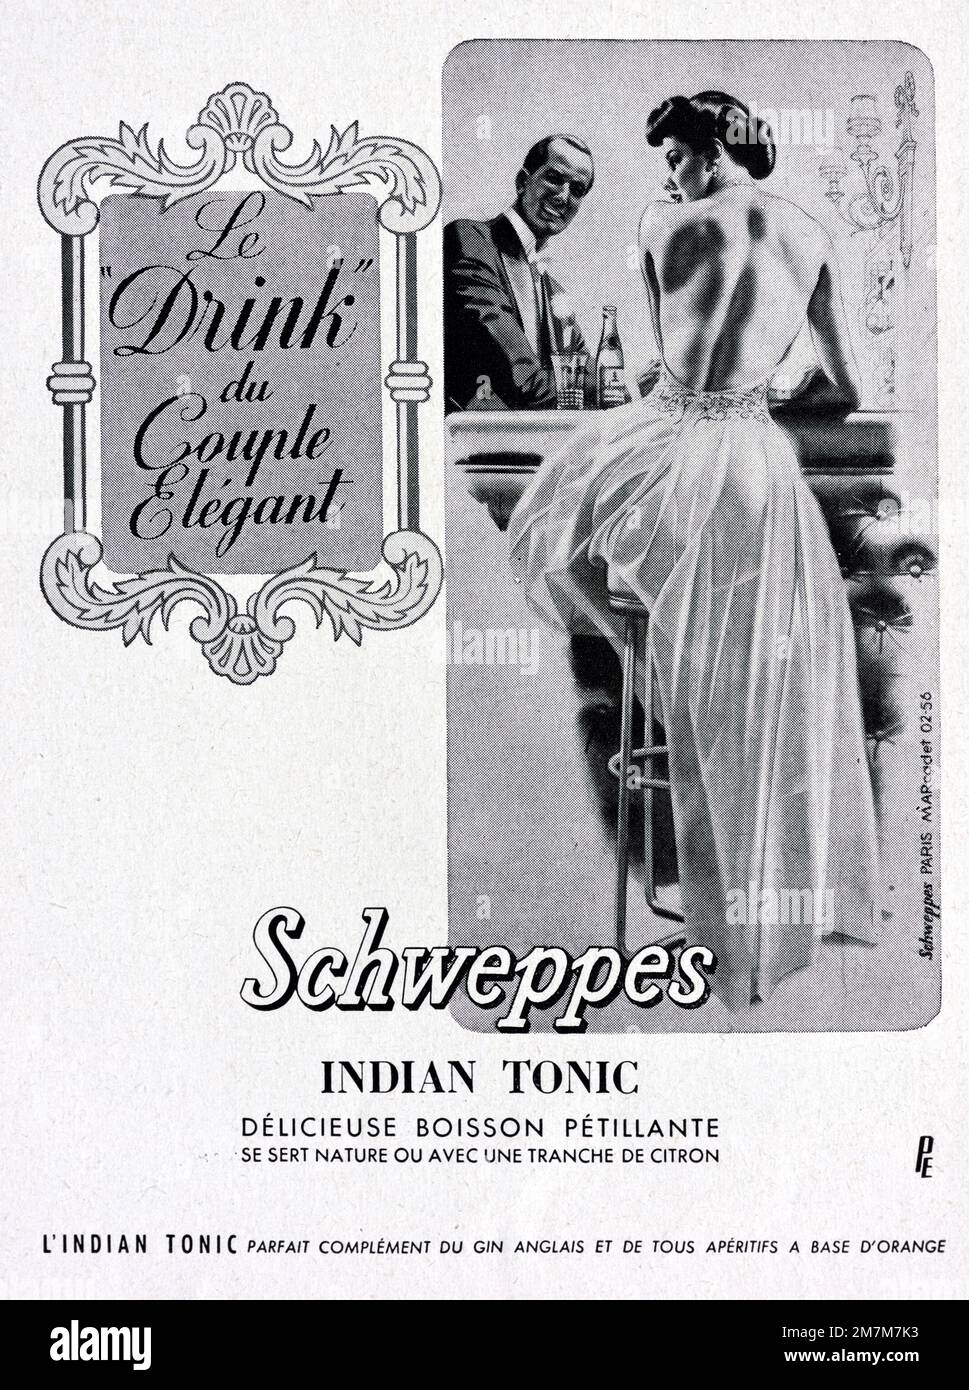 Vintage or Old Advert, Advertisement, Publicity or Illustration for Schweppes Indian Tonic Advert 1956 with Elegant Young Couple in Formal Dress or 1950s Fashion Stock Photo